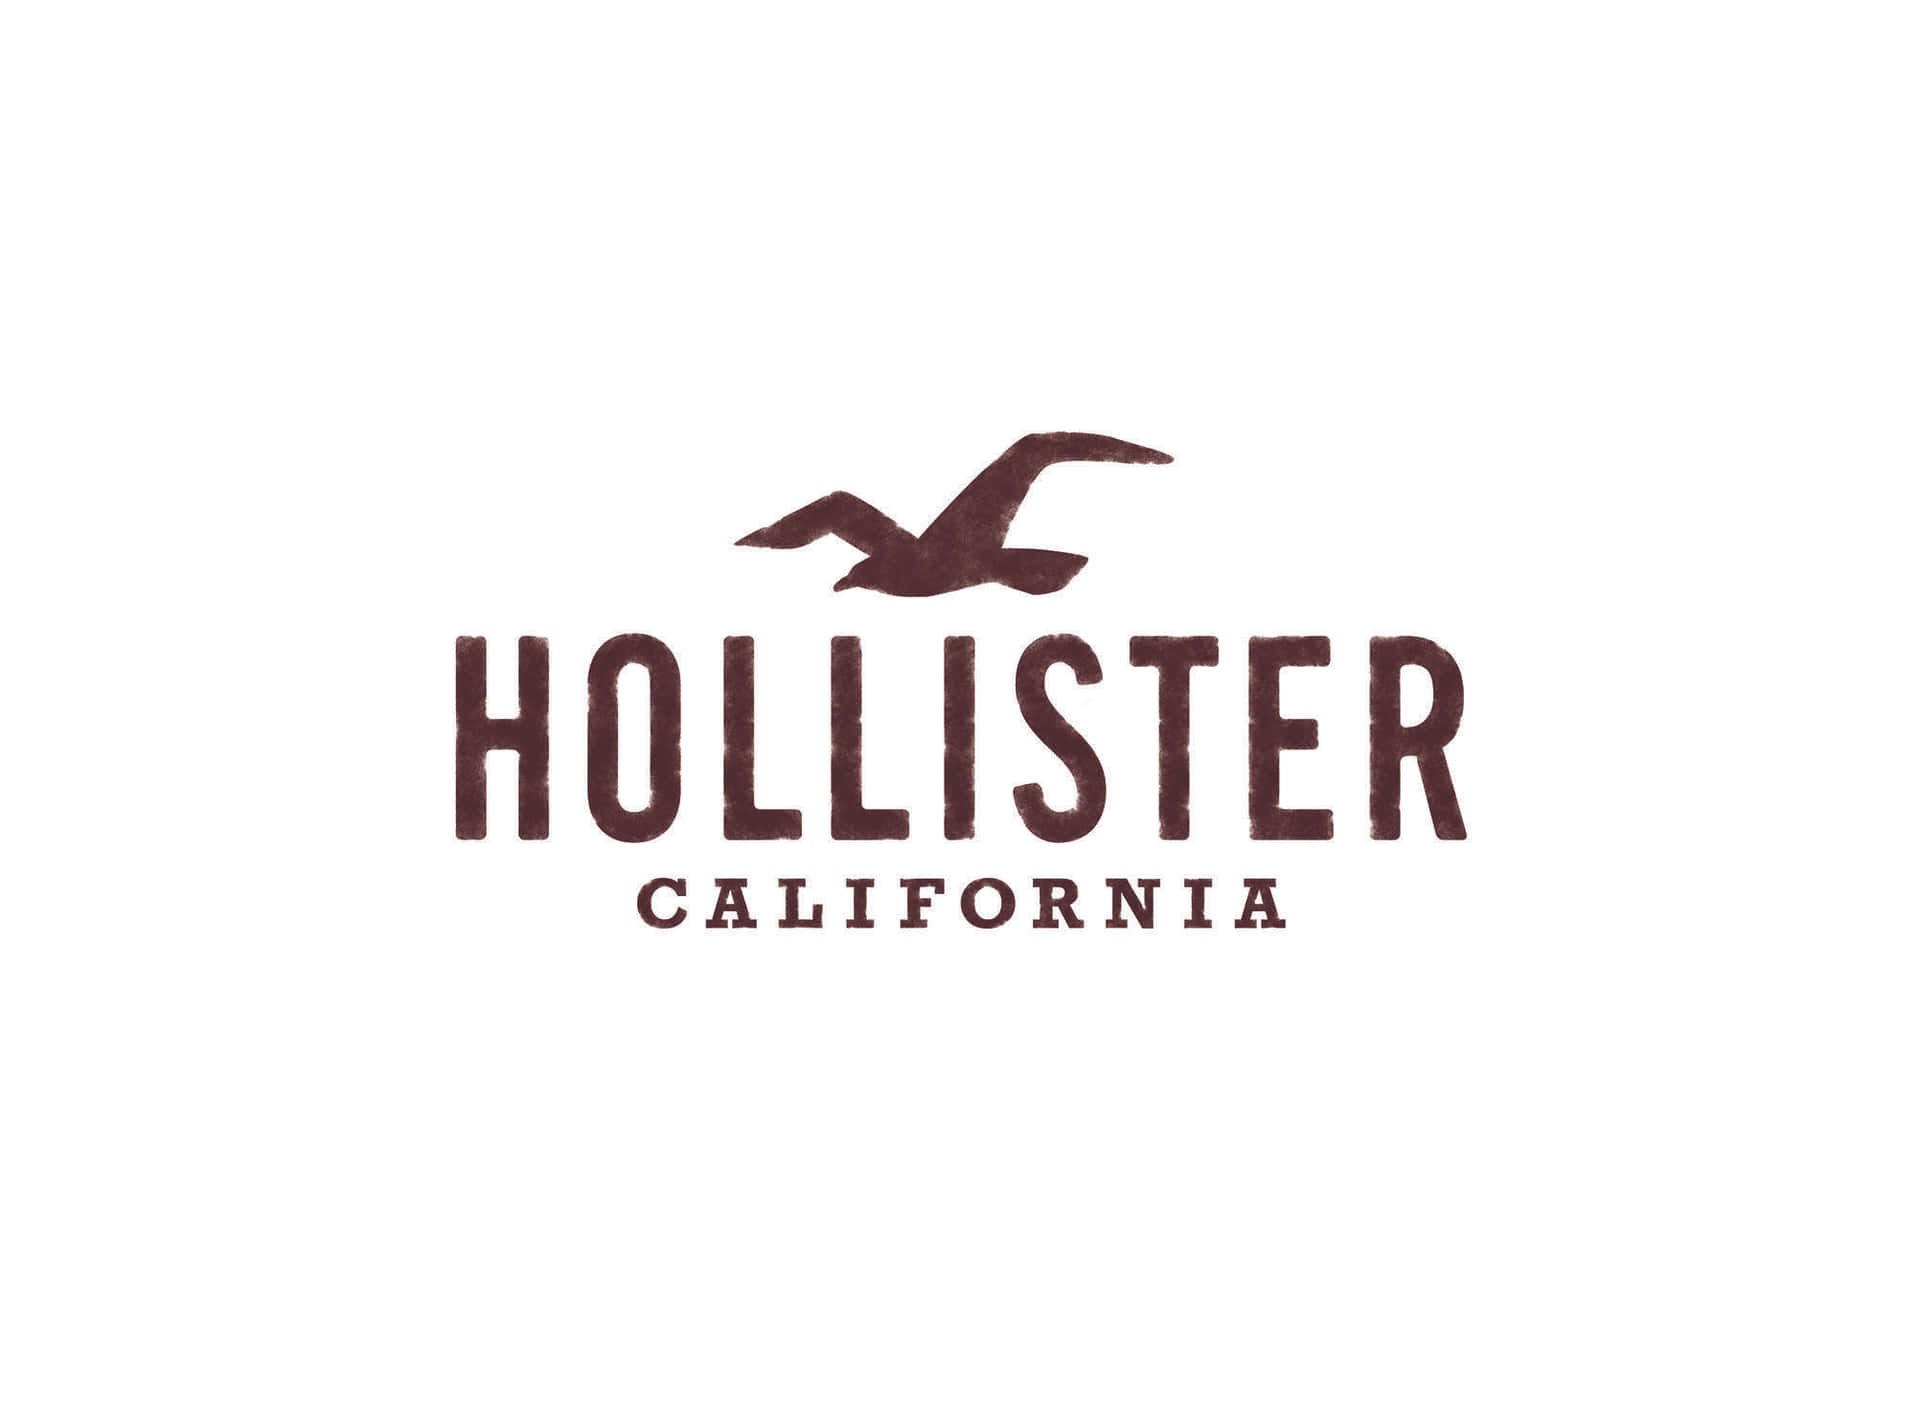 Get your summer style sorted with Hollister